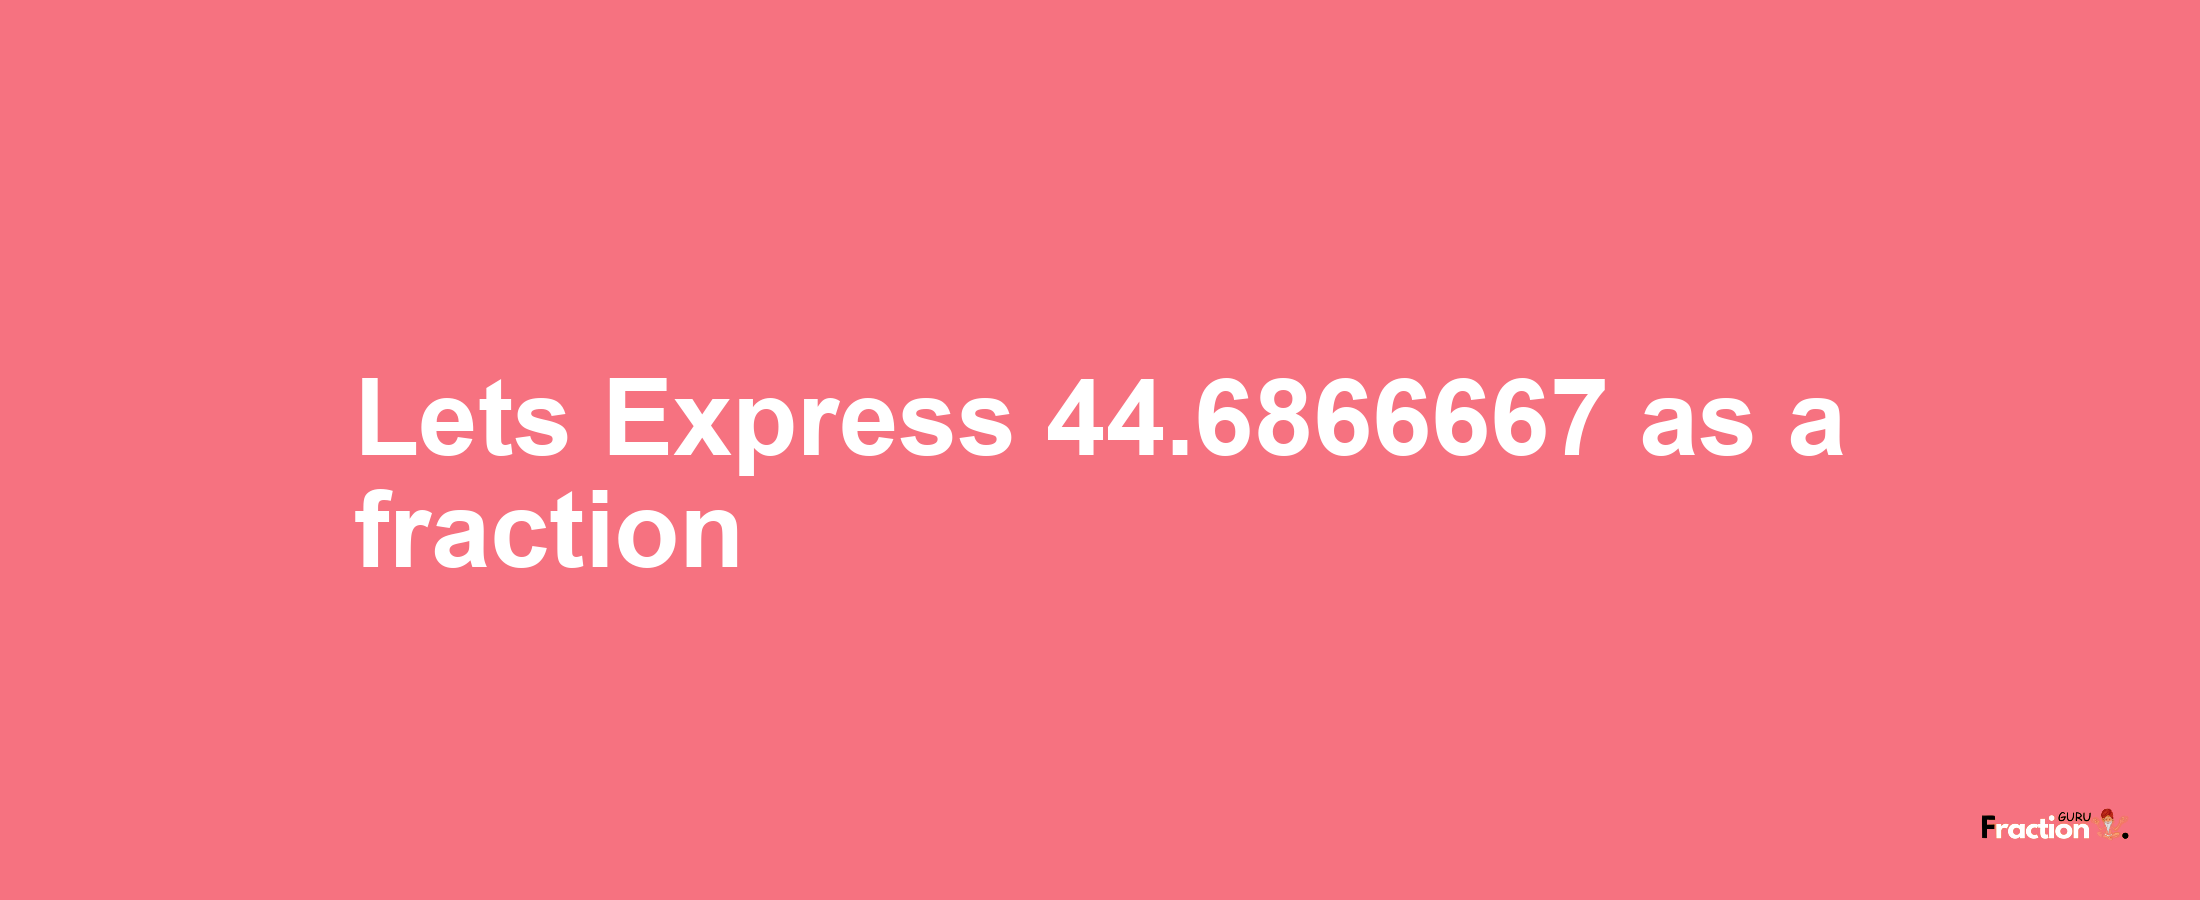 Lets Express 44.6866667 as afraction